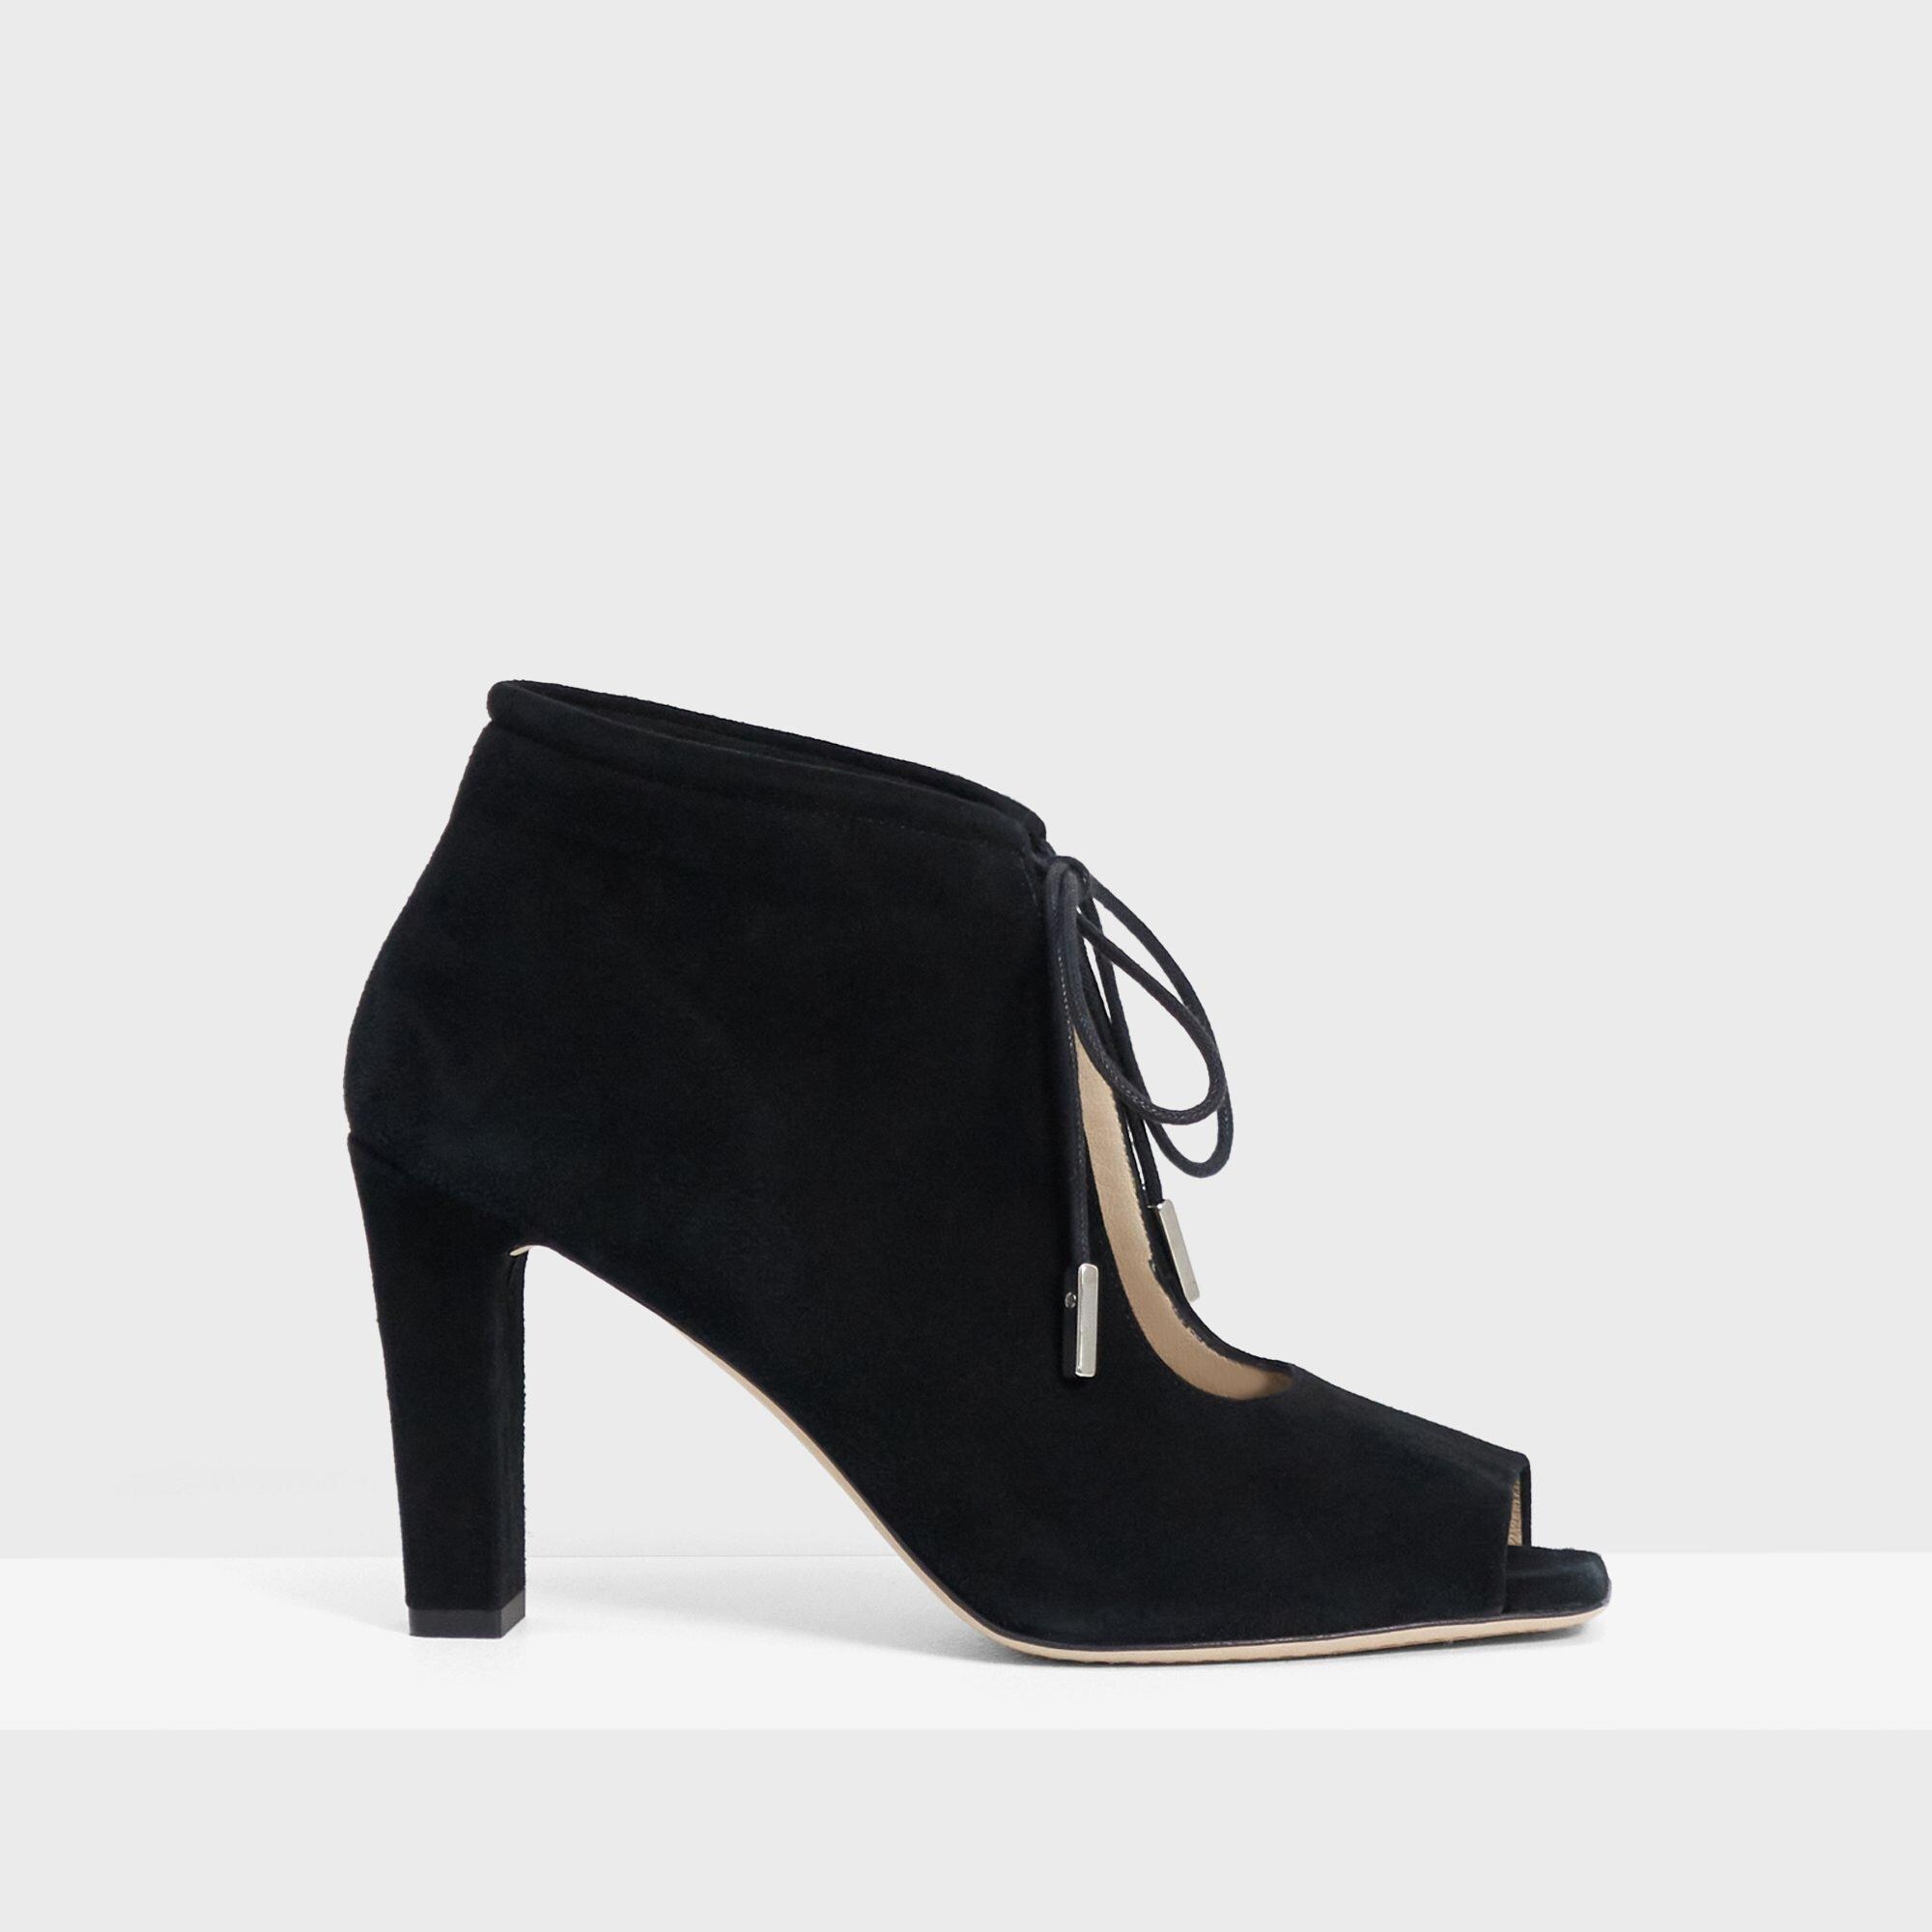 Theory Keyhole Heel in Suede